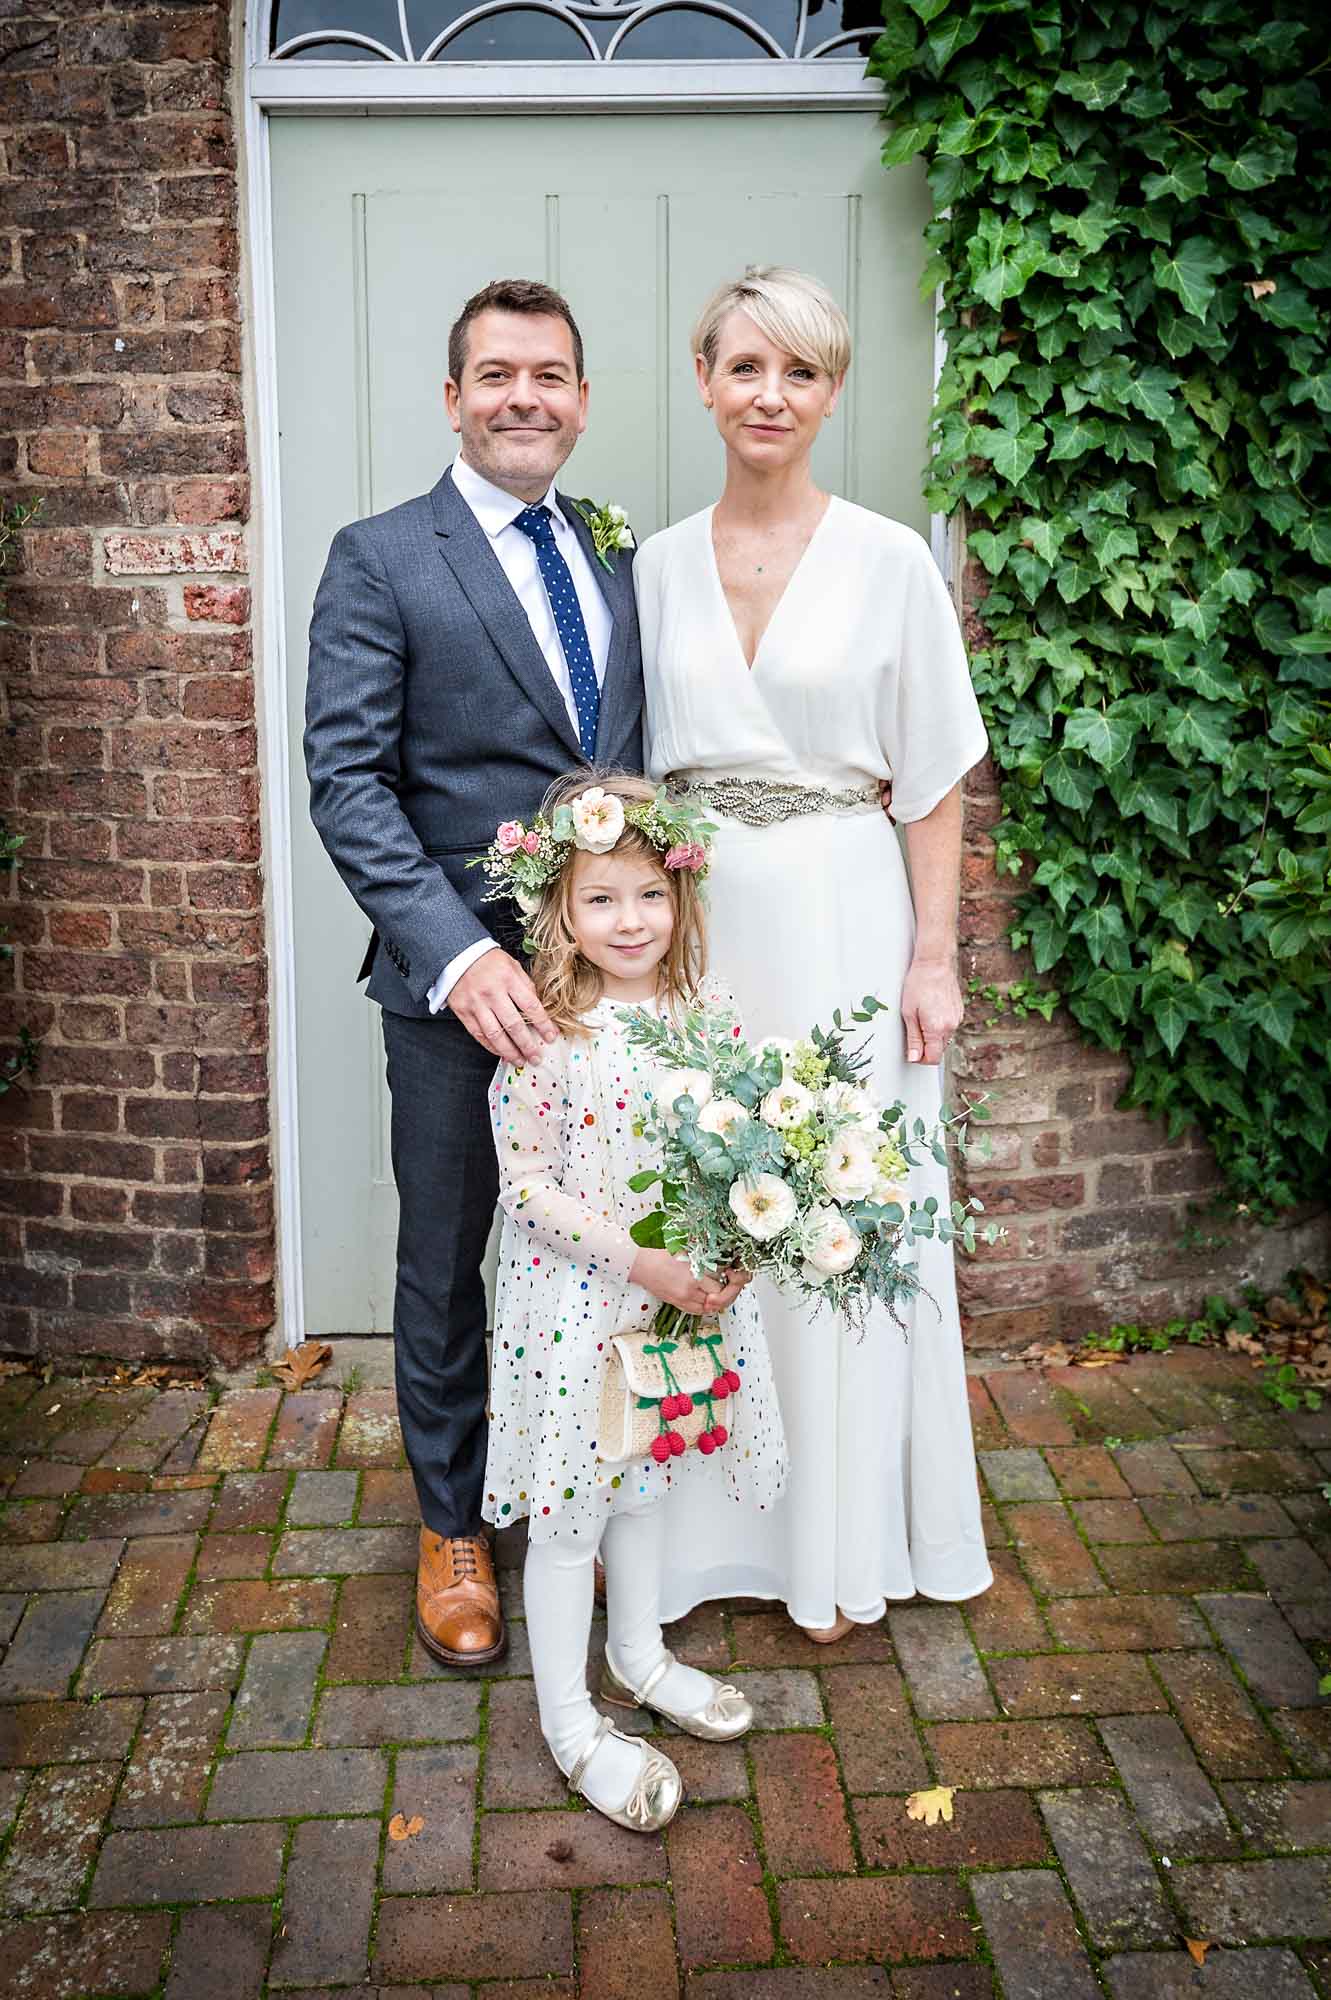 The bride and groom pose with their daughter after wedding at Morden Park House